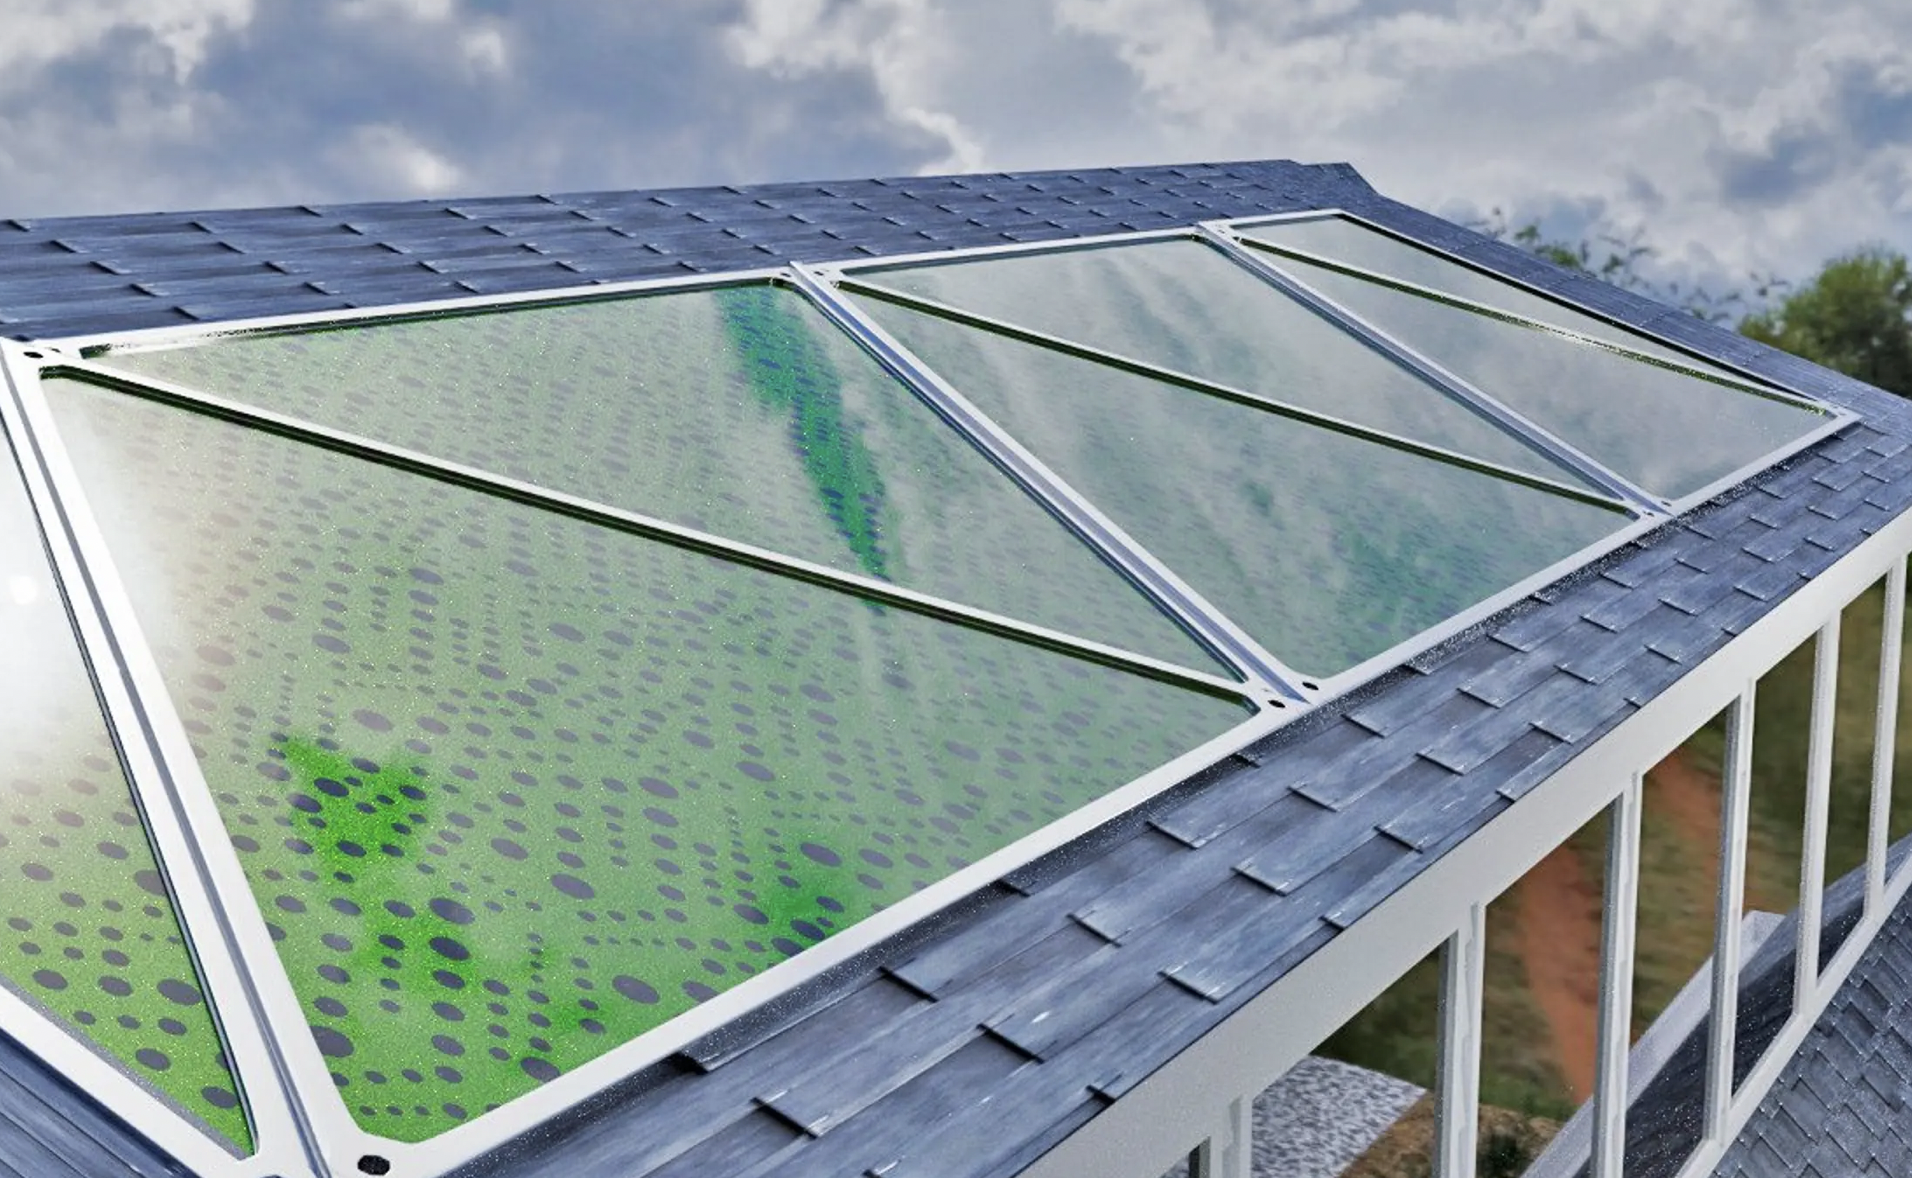 Greenfluidics bio panels will produce oxygen and biomass.  What is the electric revolution?